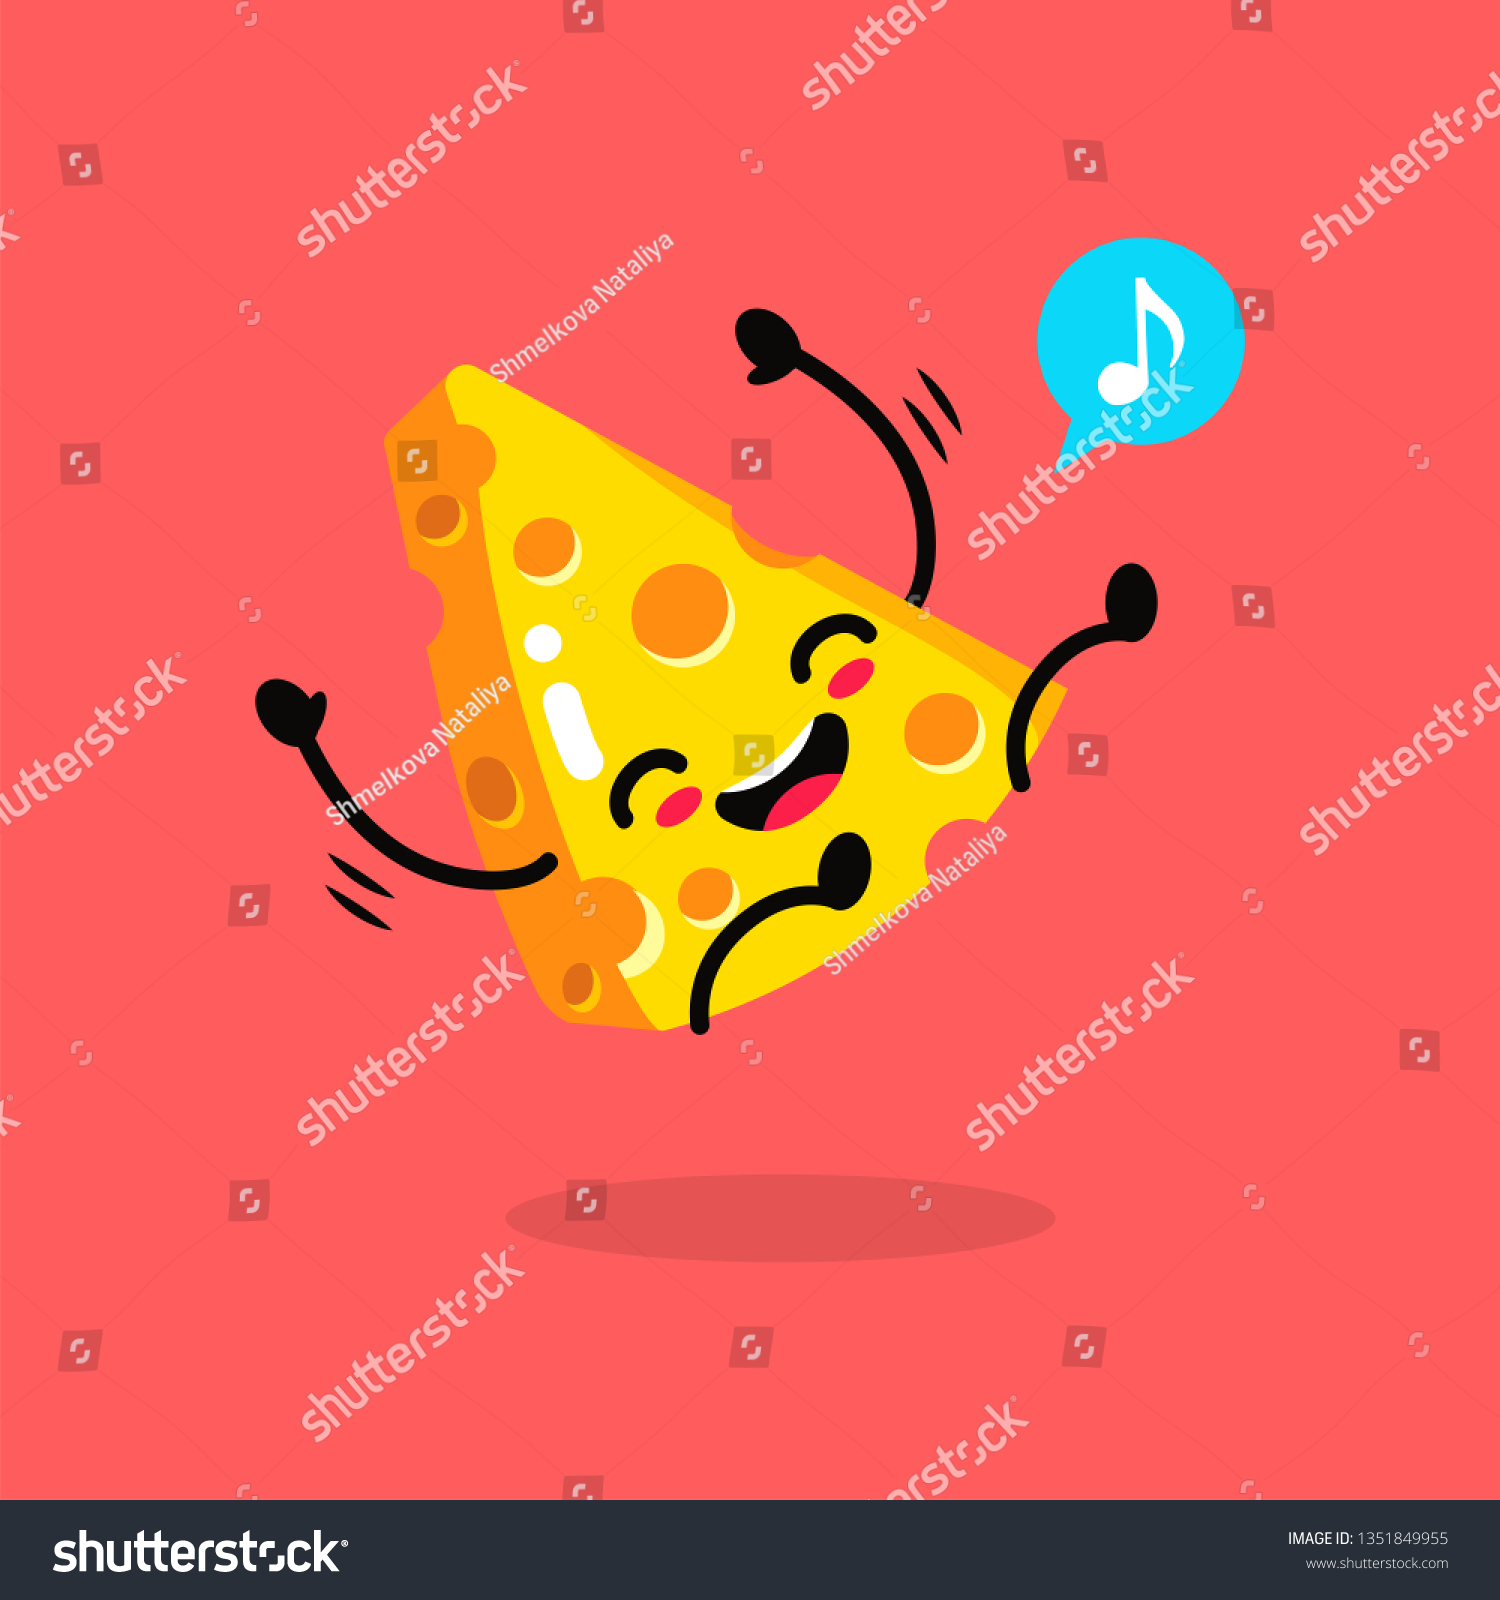 SVG of Kawaii Food. Vector Cartoon Cheese. Happy Funny Asian Character for Children's Restaurant Menu, Fast Food Banner, Cafe Promotion, Educational Flash Cards for Kids. Cute Chinese Hand Drawn Face.  svg